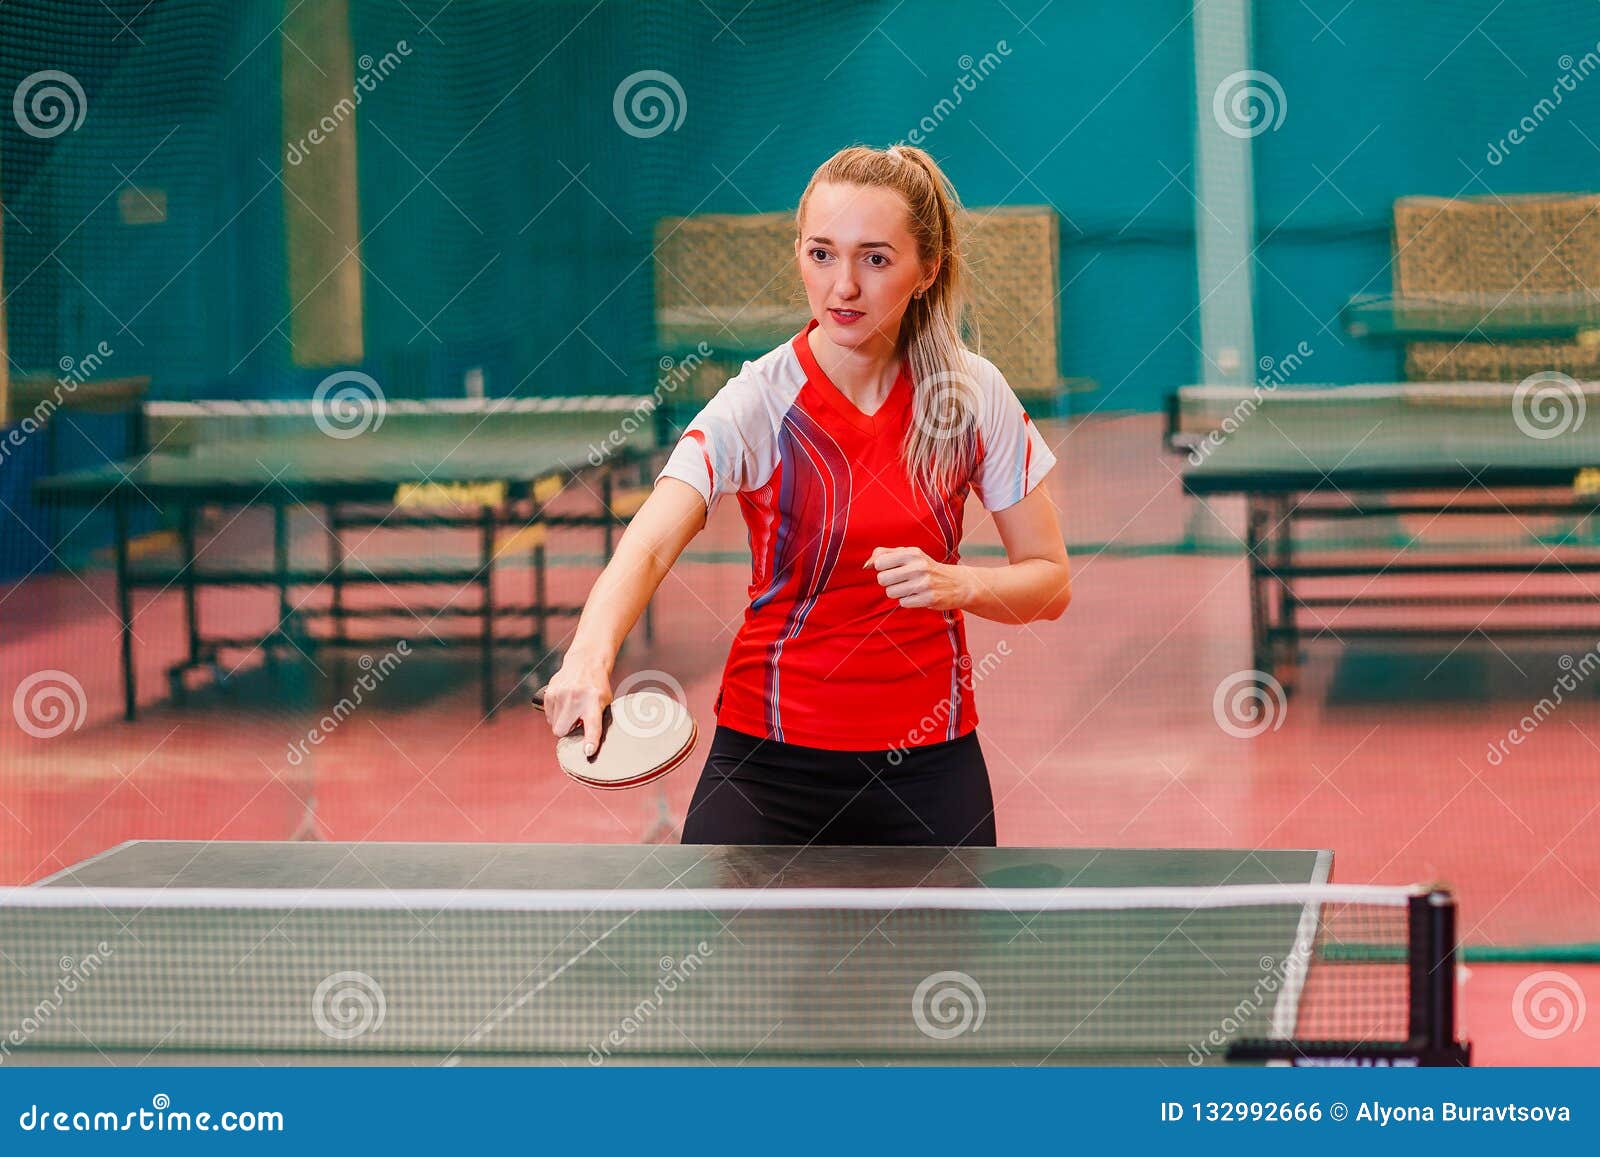 Young Woman  Athlete Plays Ping  Pong  Stock Photo Image of 